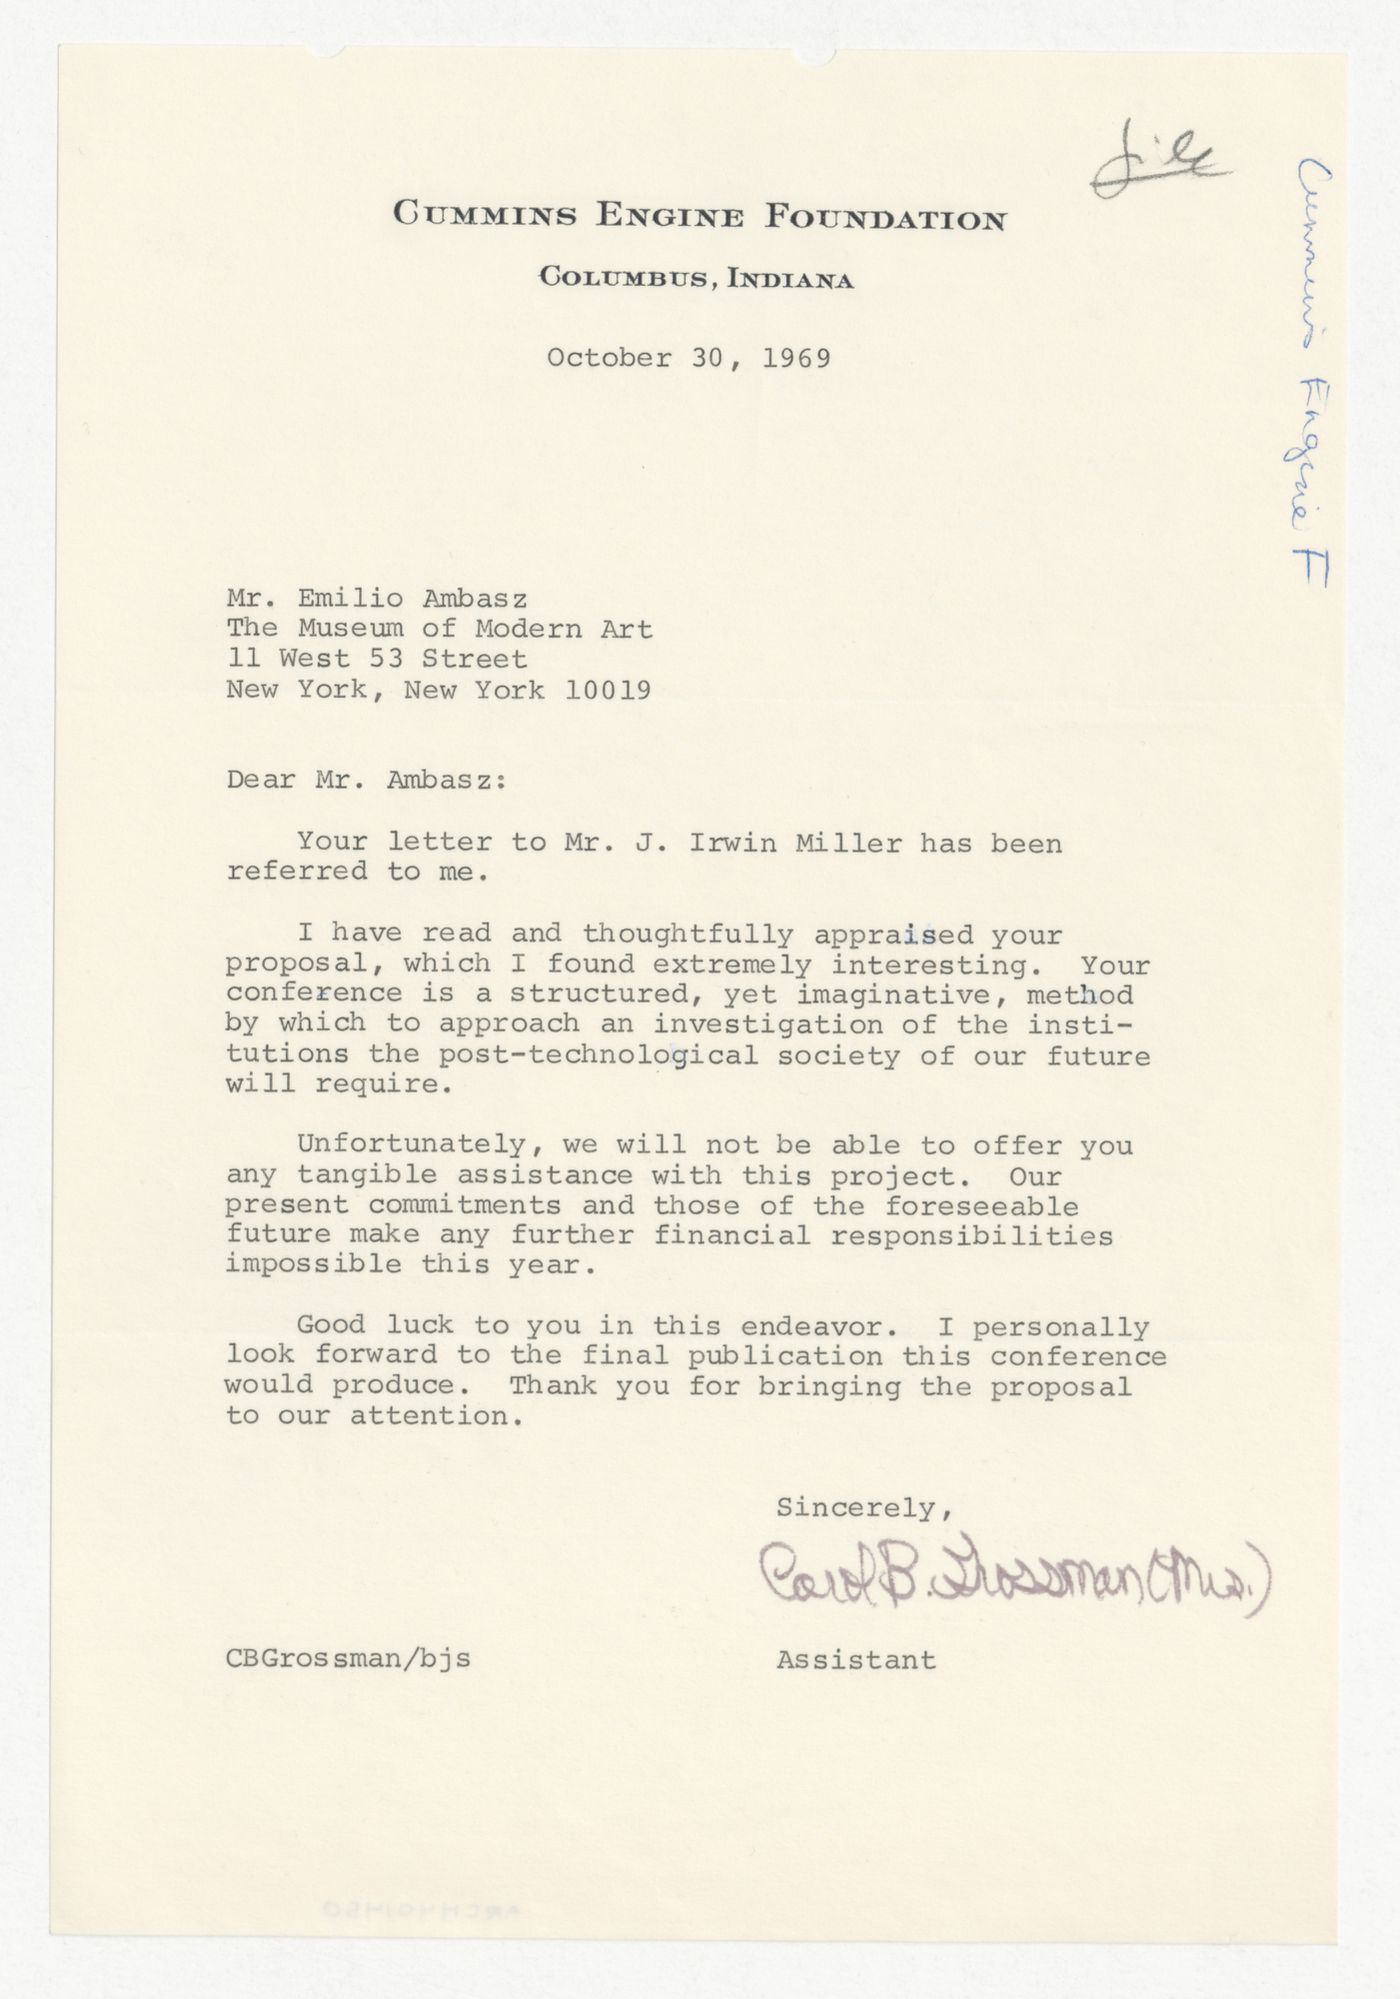 Letter from Carol B. Grossman to Emilio Ambasz responding to proposal for Institutions for a Post-Technological Society conference